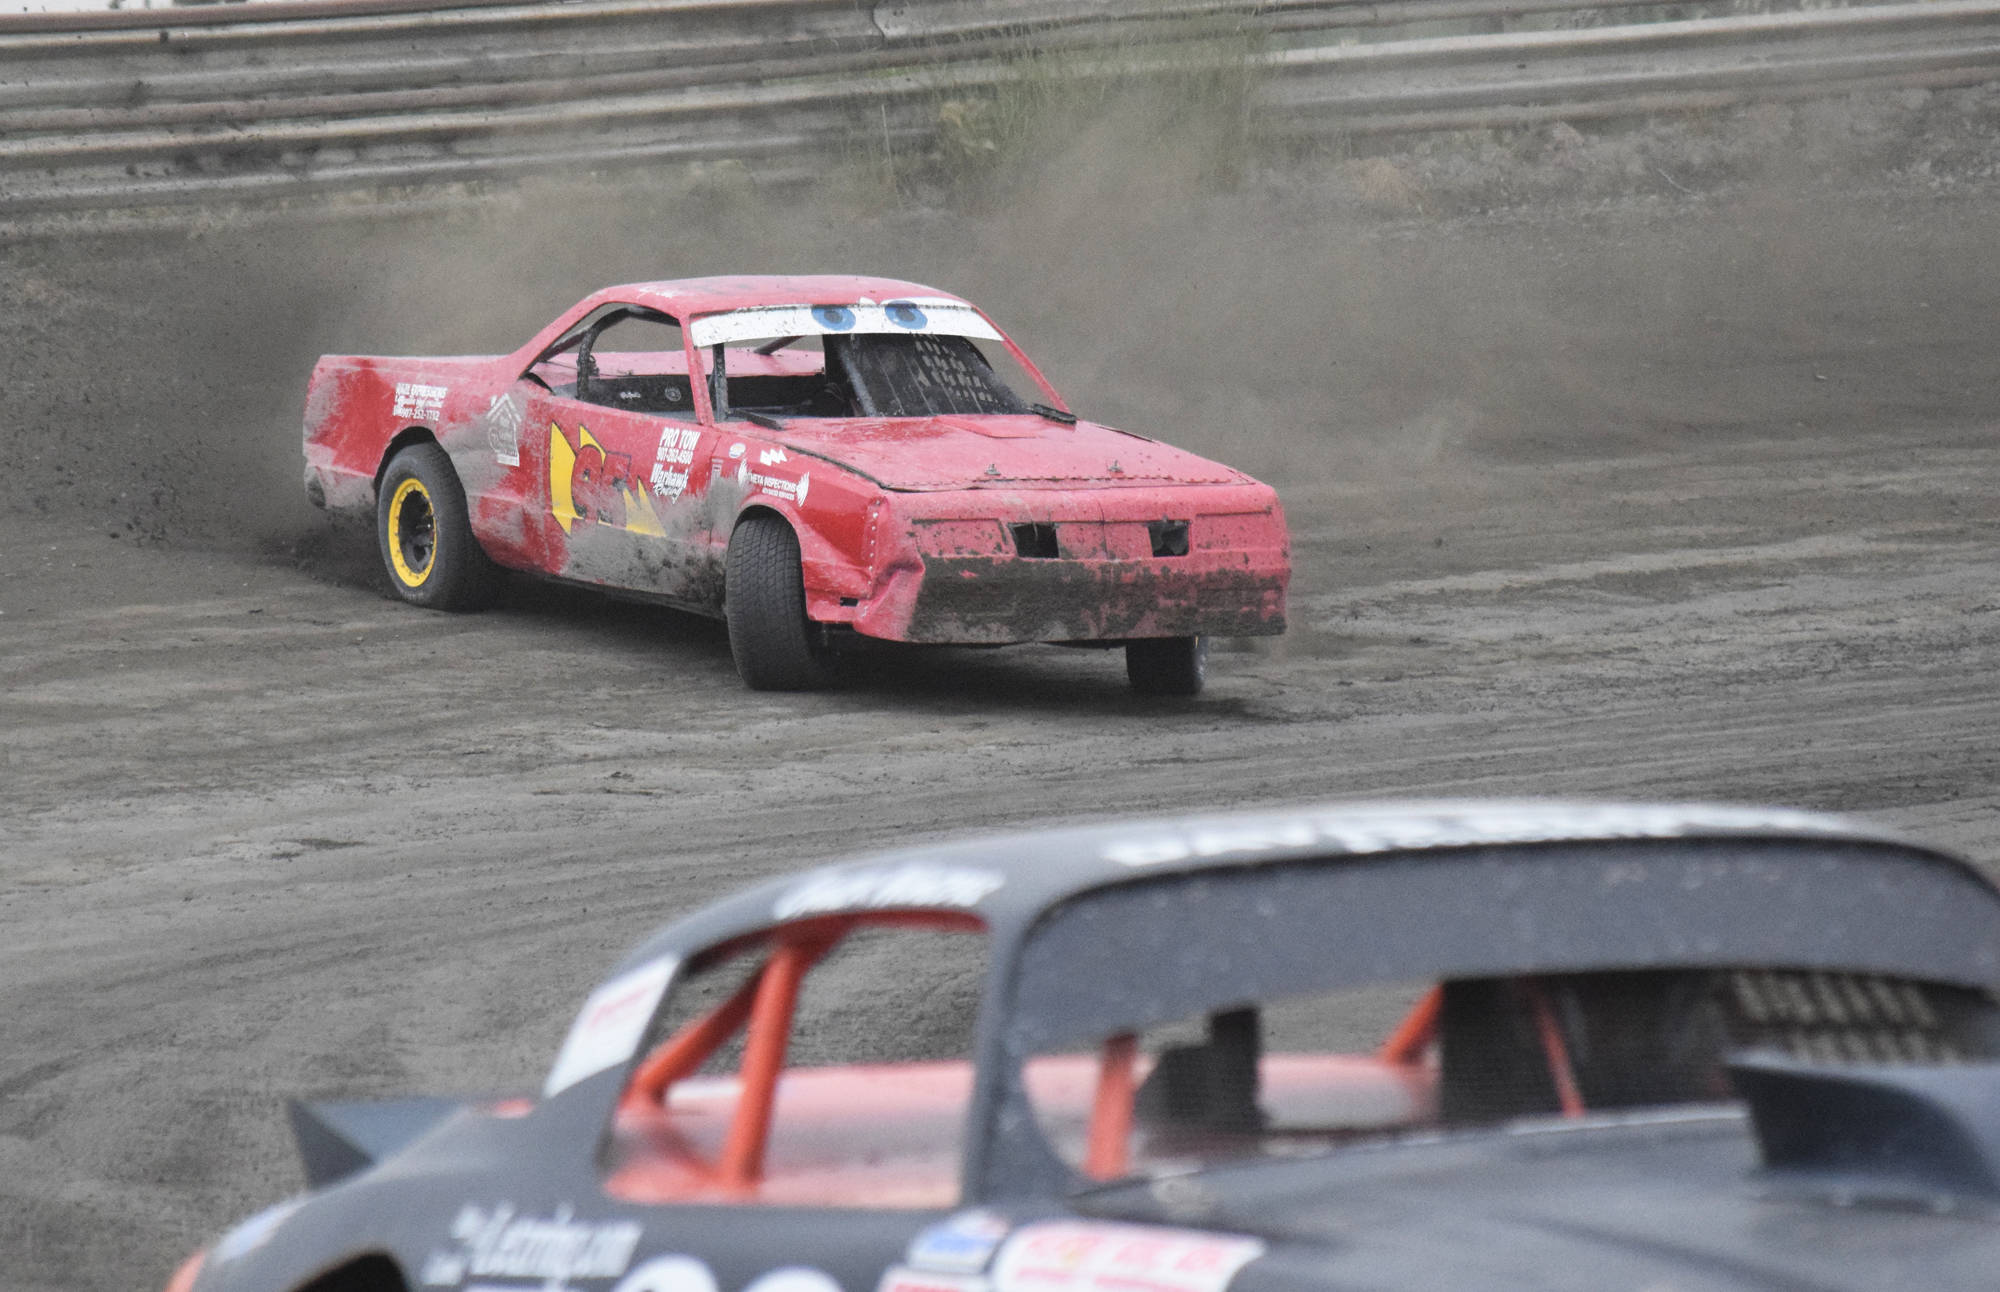 Mady Stichal slides her No. 95 A-Stock car around the turn Saturday, July 13, 2019, during the Powder Puff feature race at Twin City Raceway in Kenai, Alaska. (Photo by Joey Klecka/Peninsula Clarion)